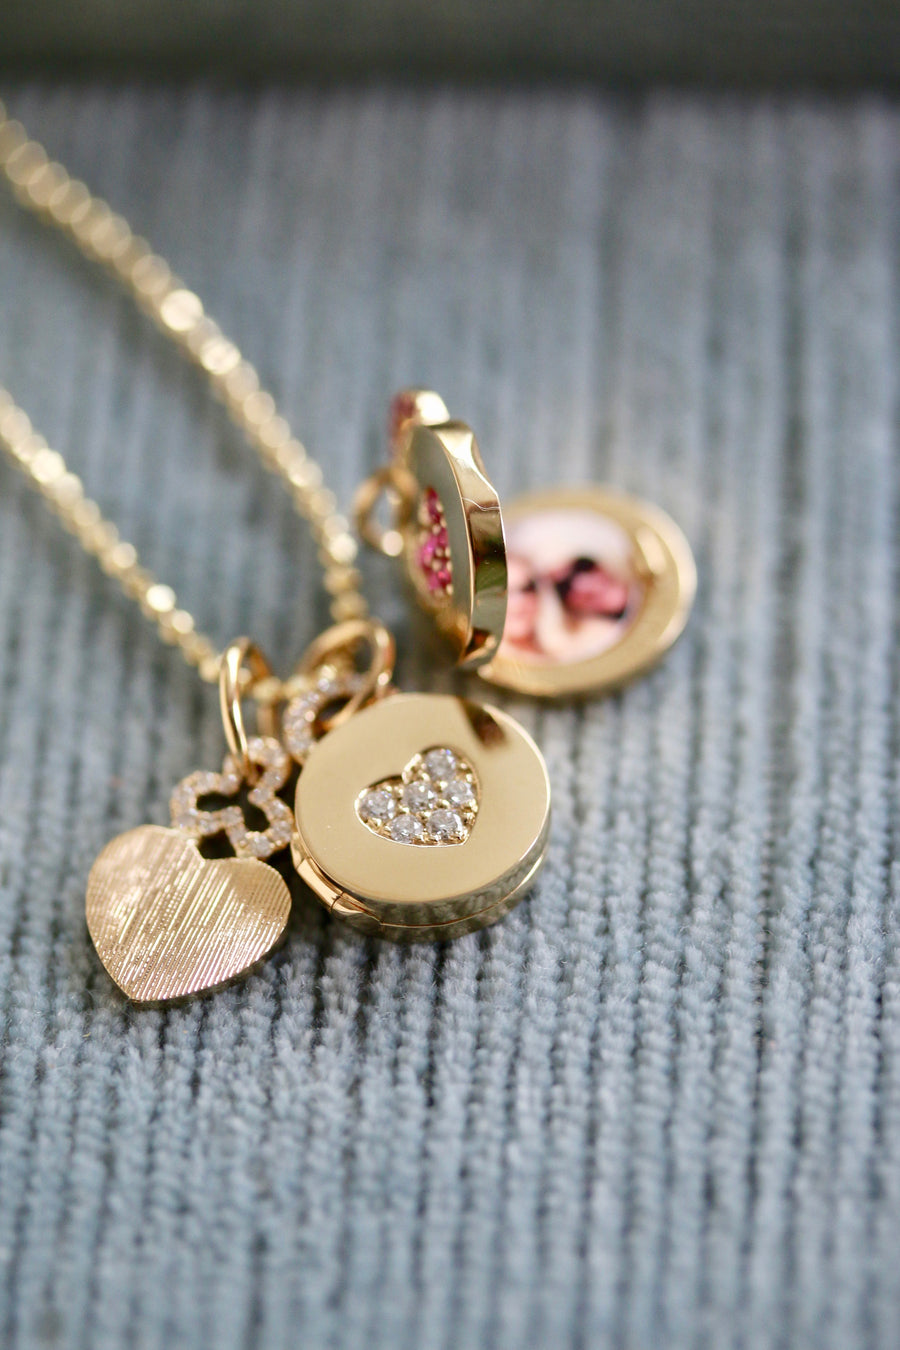 Mini locket pendant necklace featuring a heart pavé motif, radiating elegance and romance. This delicate piece showcases a charming heart-shaped locket adorned with intricate pavé detailing, adding a touch of sparkle and allure. The pavé motif accentuates the locket's timeless design, making it a symbol of love and affection that beautifully complements any ensemble. Additionally, the locket opens to allow someone to add their cherished pictures inside, adding a personal touch to this exquisite accessory.